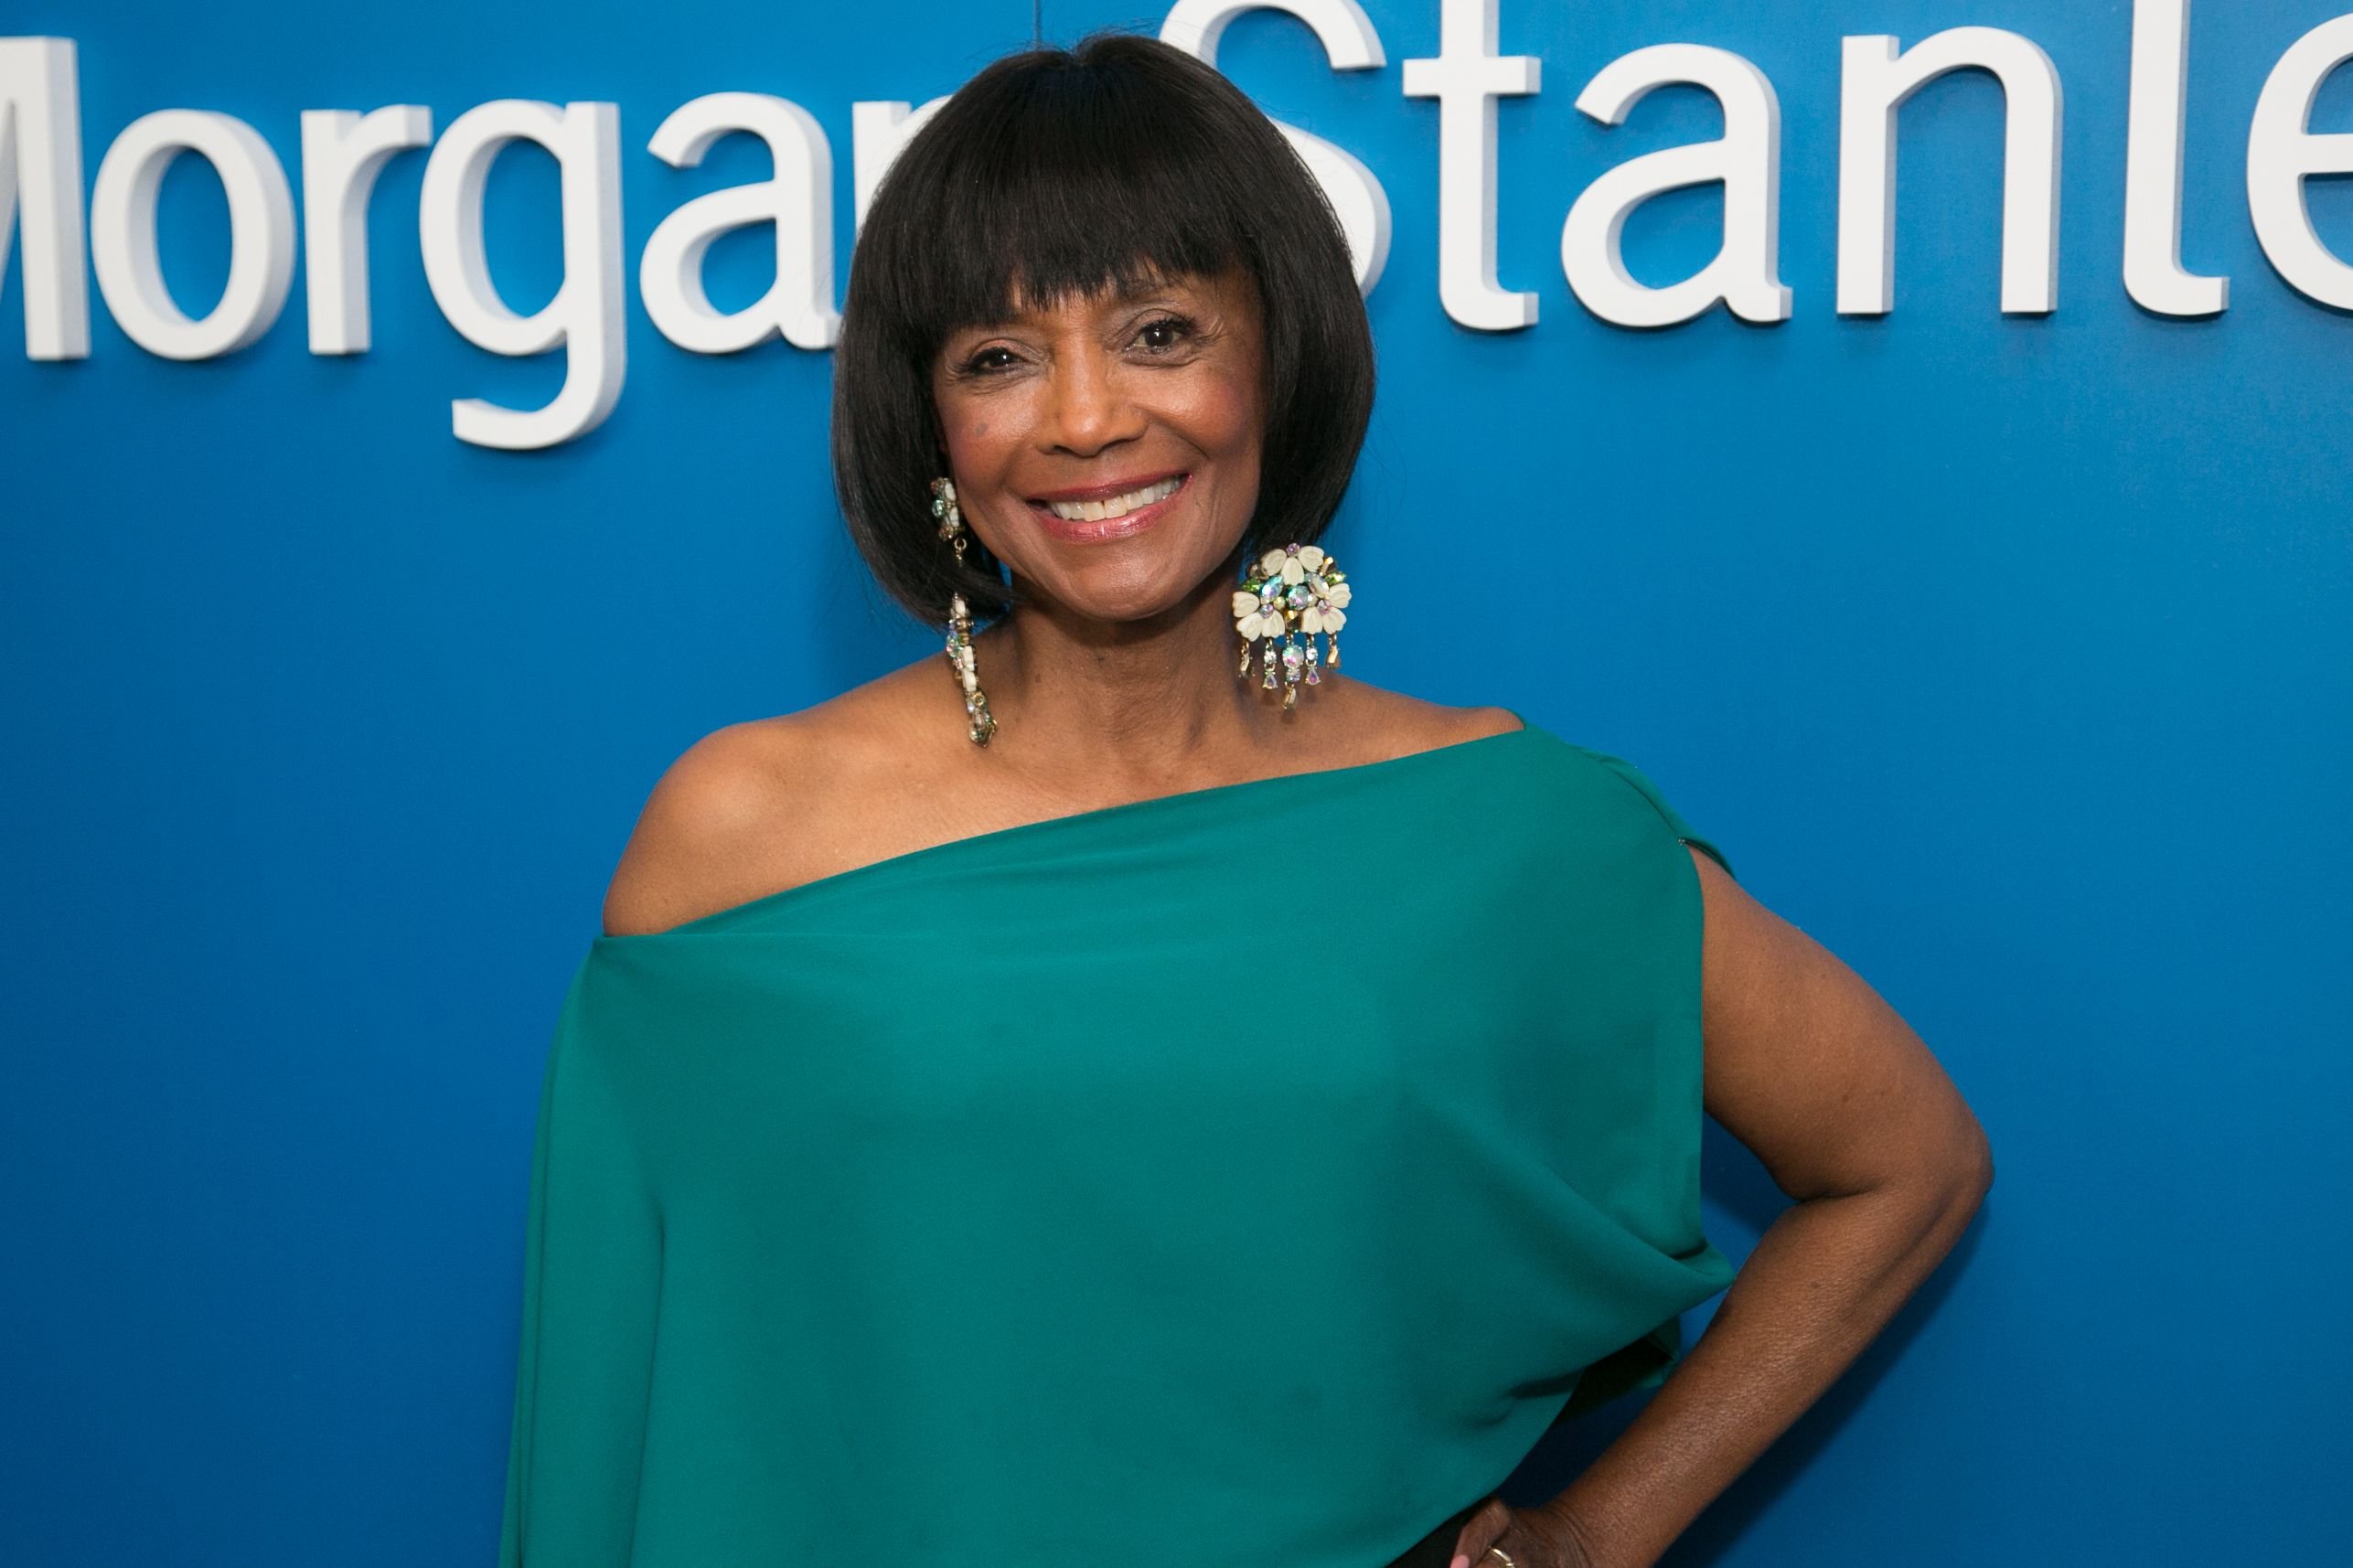 Margaret Avery attends "Alfre Woodard and Morgan Stanley present the 9th Annual Oscar's Sistahs Soiree" on February 28, 2018 in Los Angeles, California. | Source: Getty Images